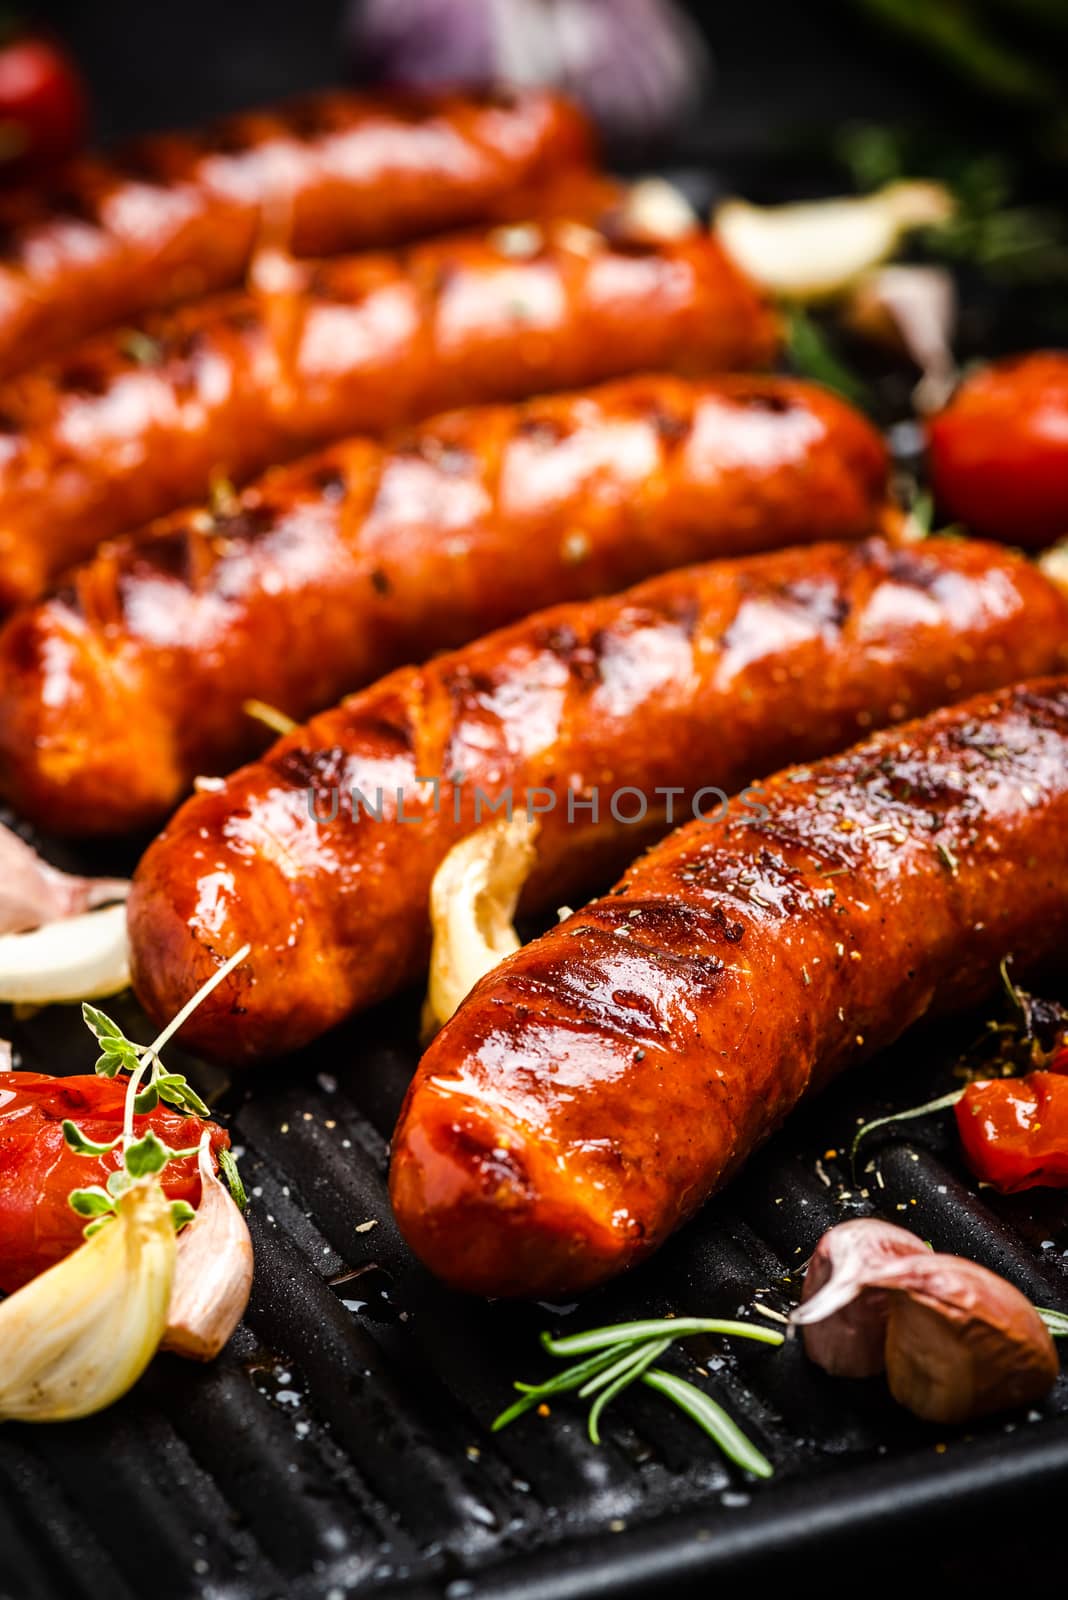 Grilled Sausages with Fresh Herbs and Spices. Close Up View on Grill. Summer Party Food.